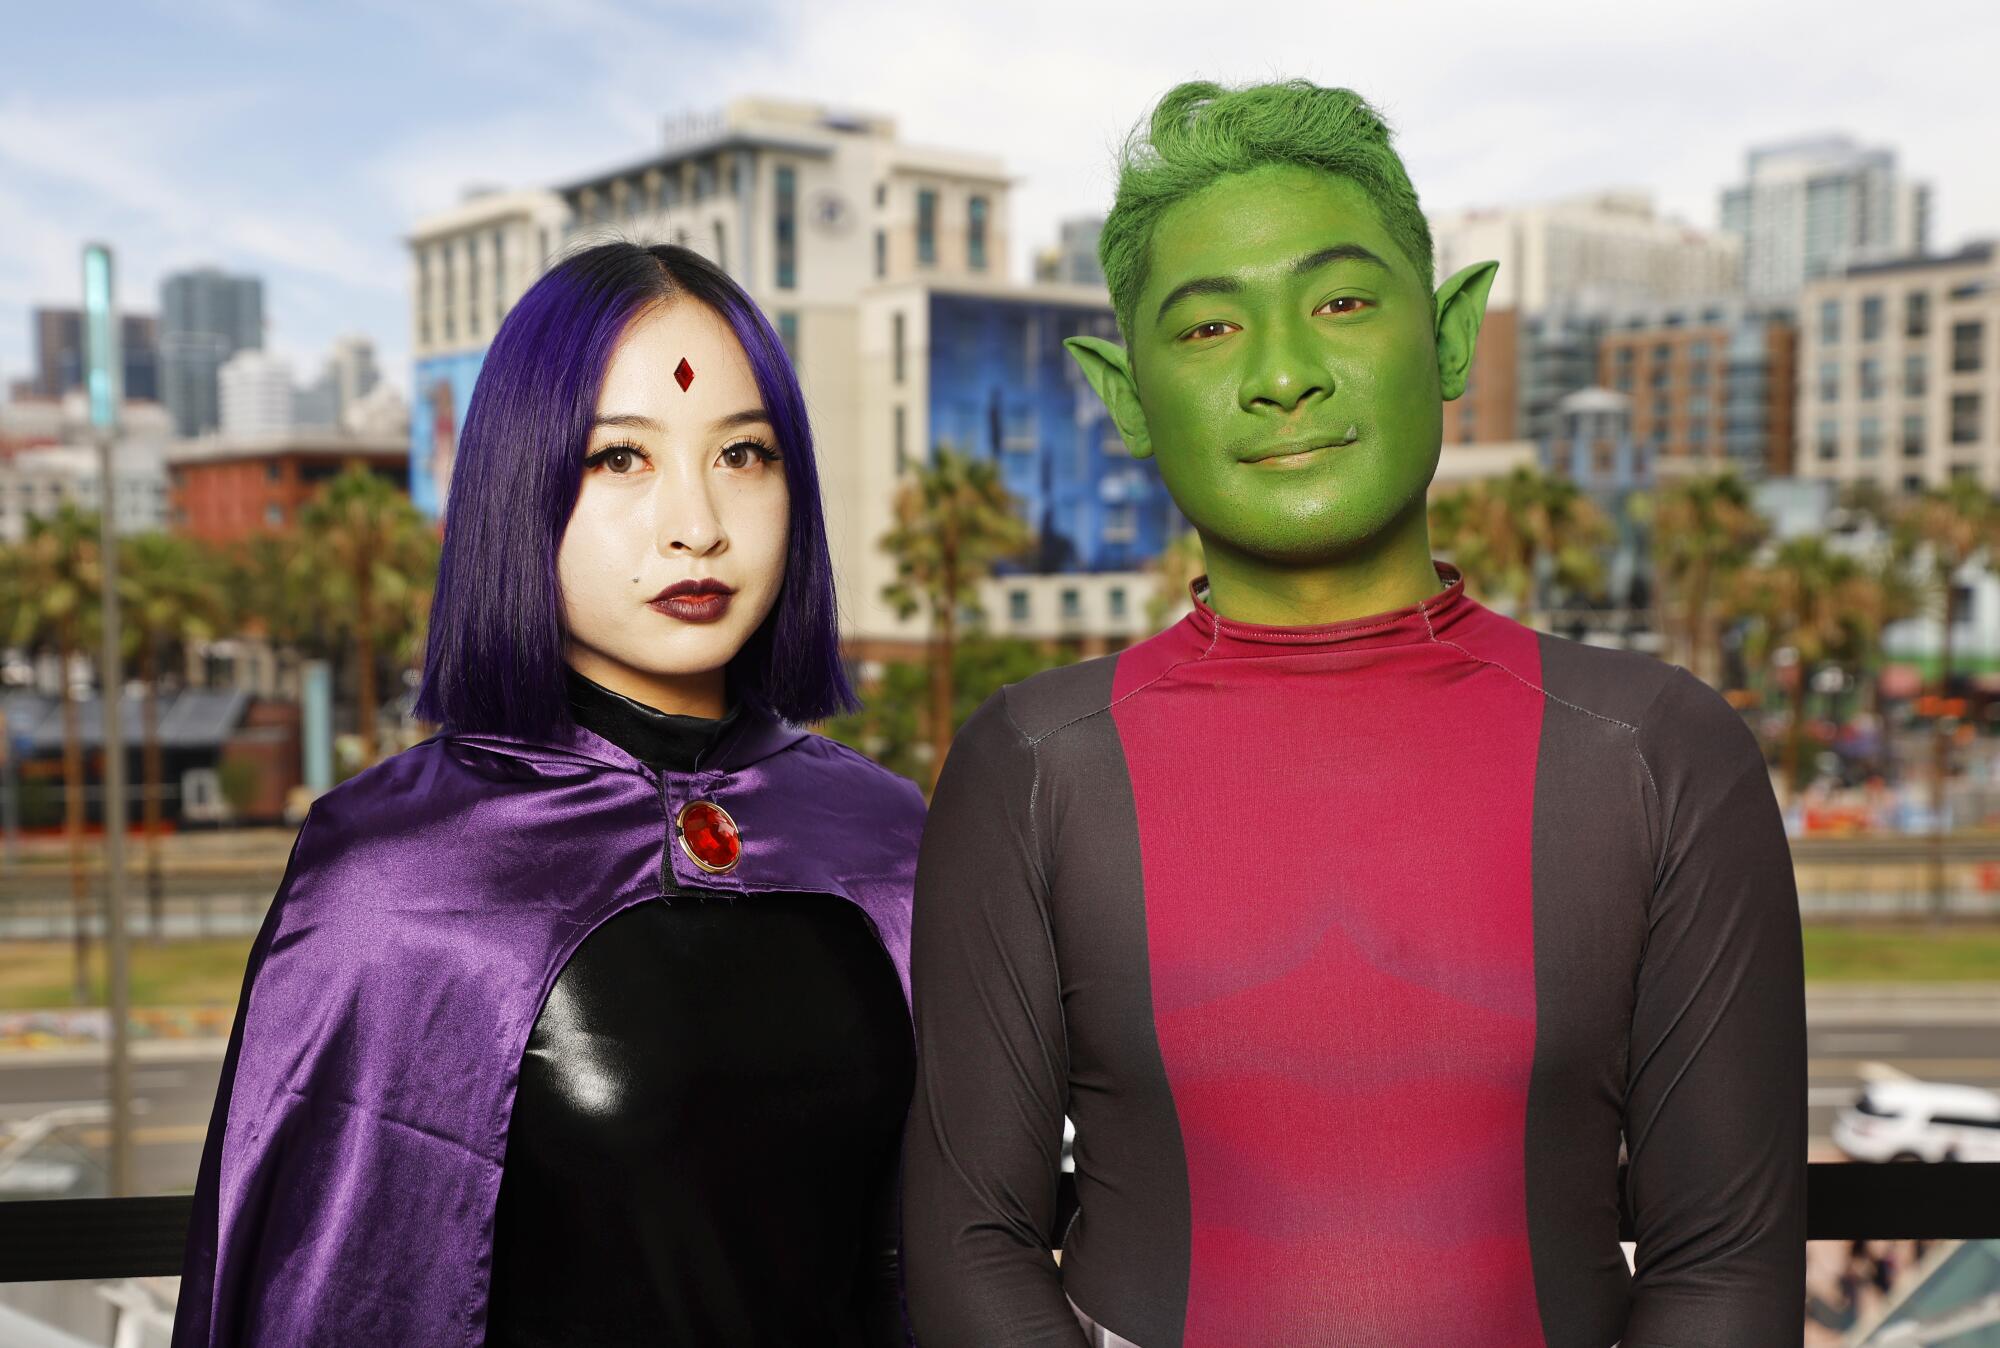 Amy Sayasne dressed as Raven and Randy Song as Beast Boy at Comic-Con.